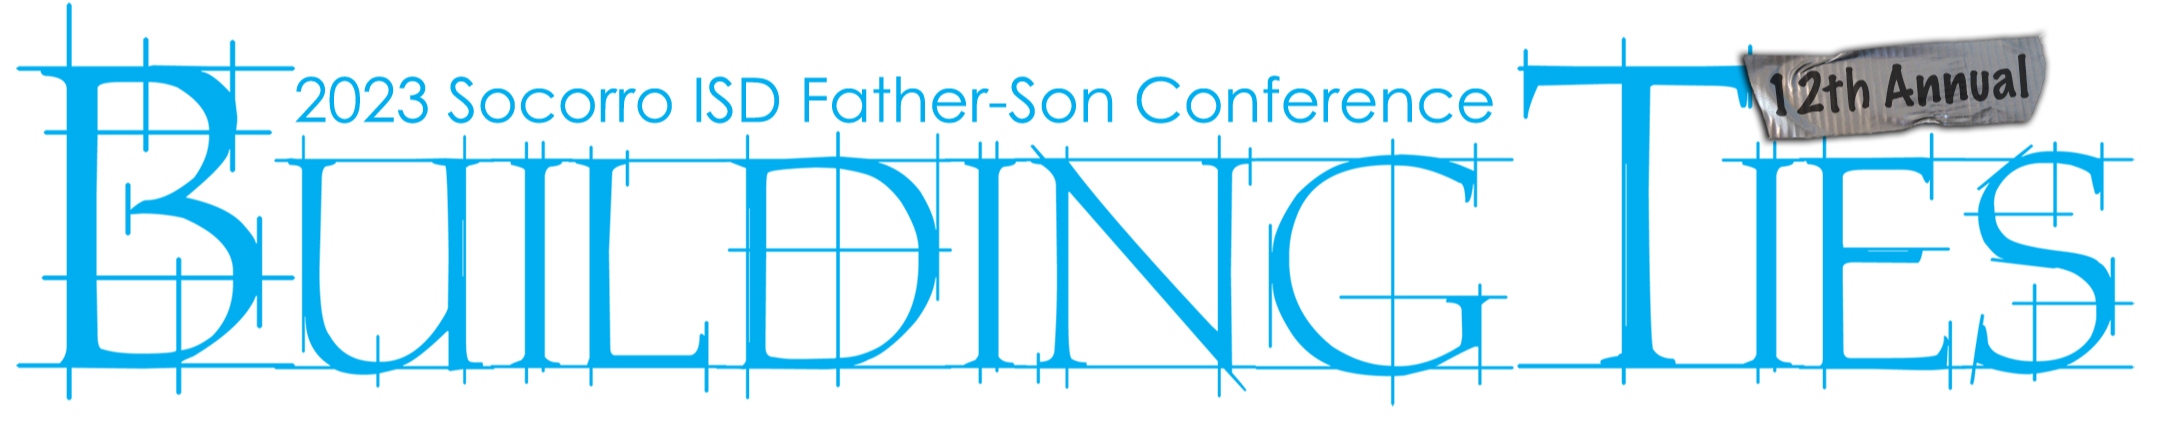 2023 sisd 12th annual father-son conference graphic - building ties